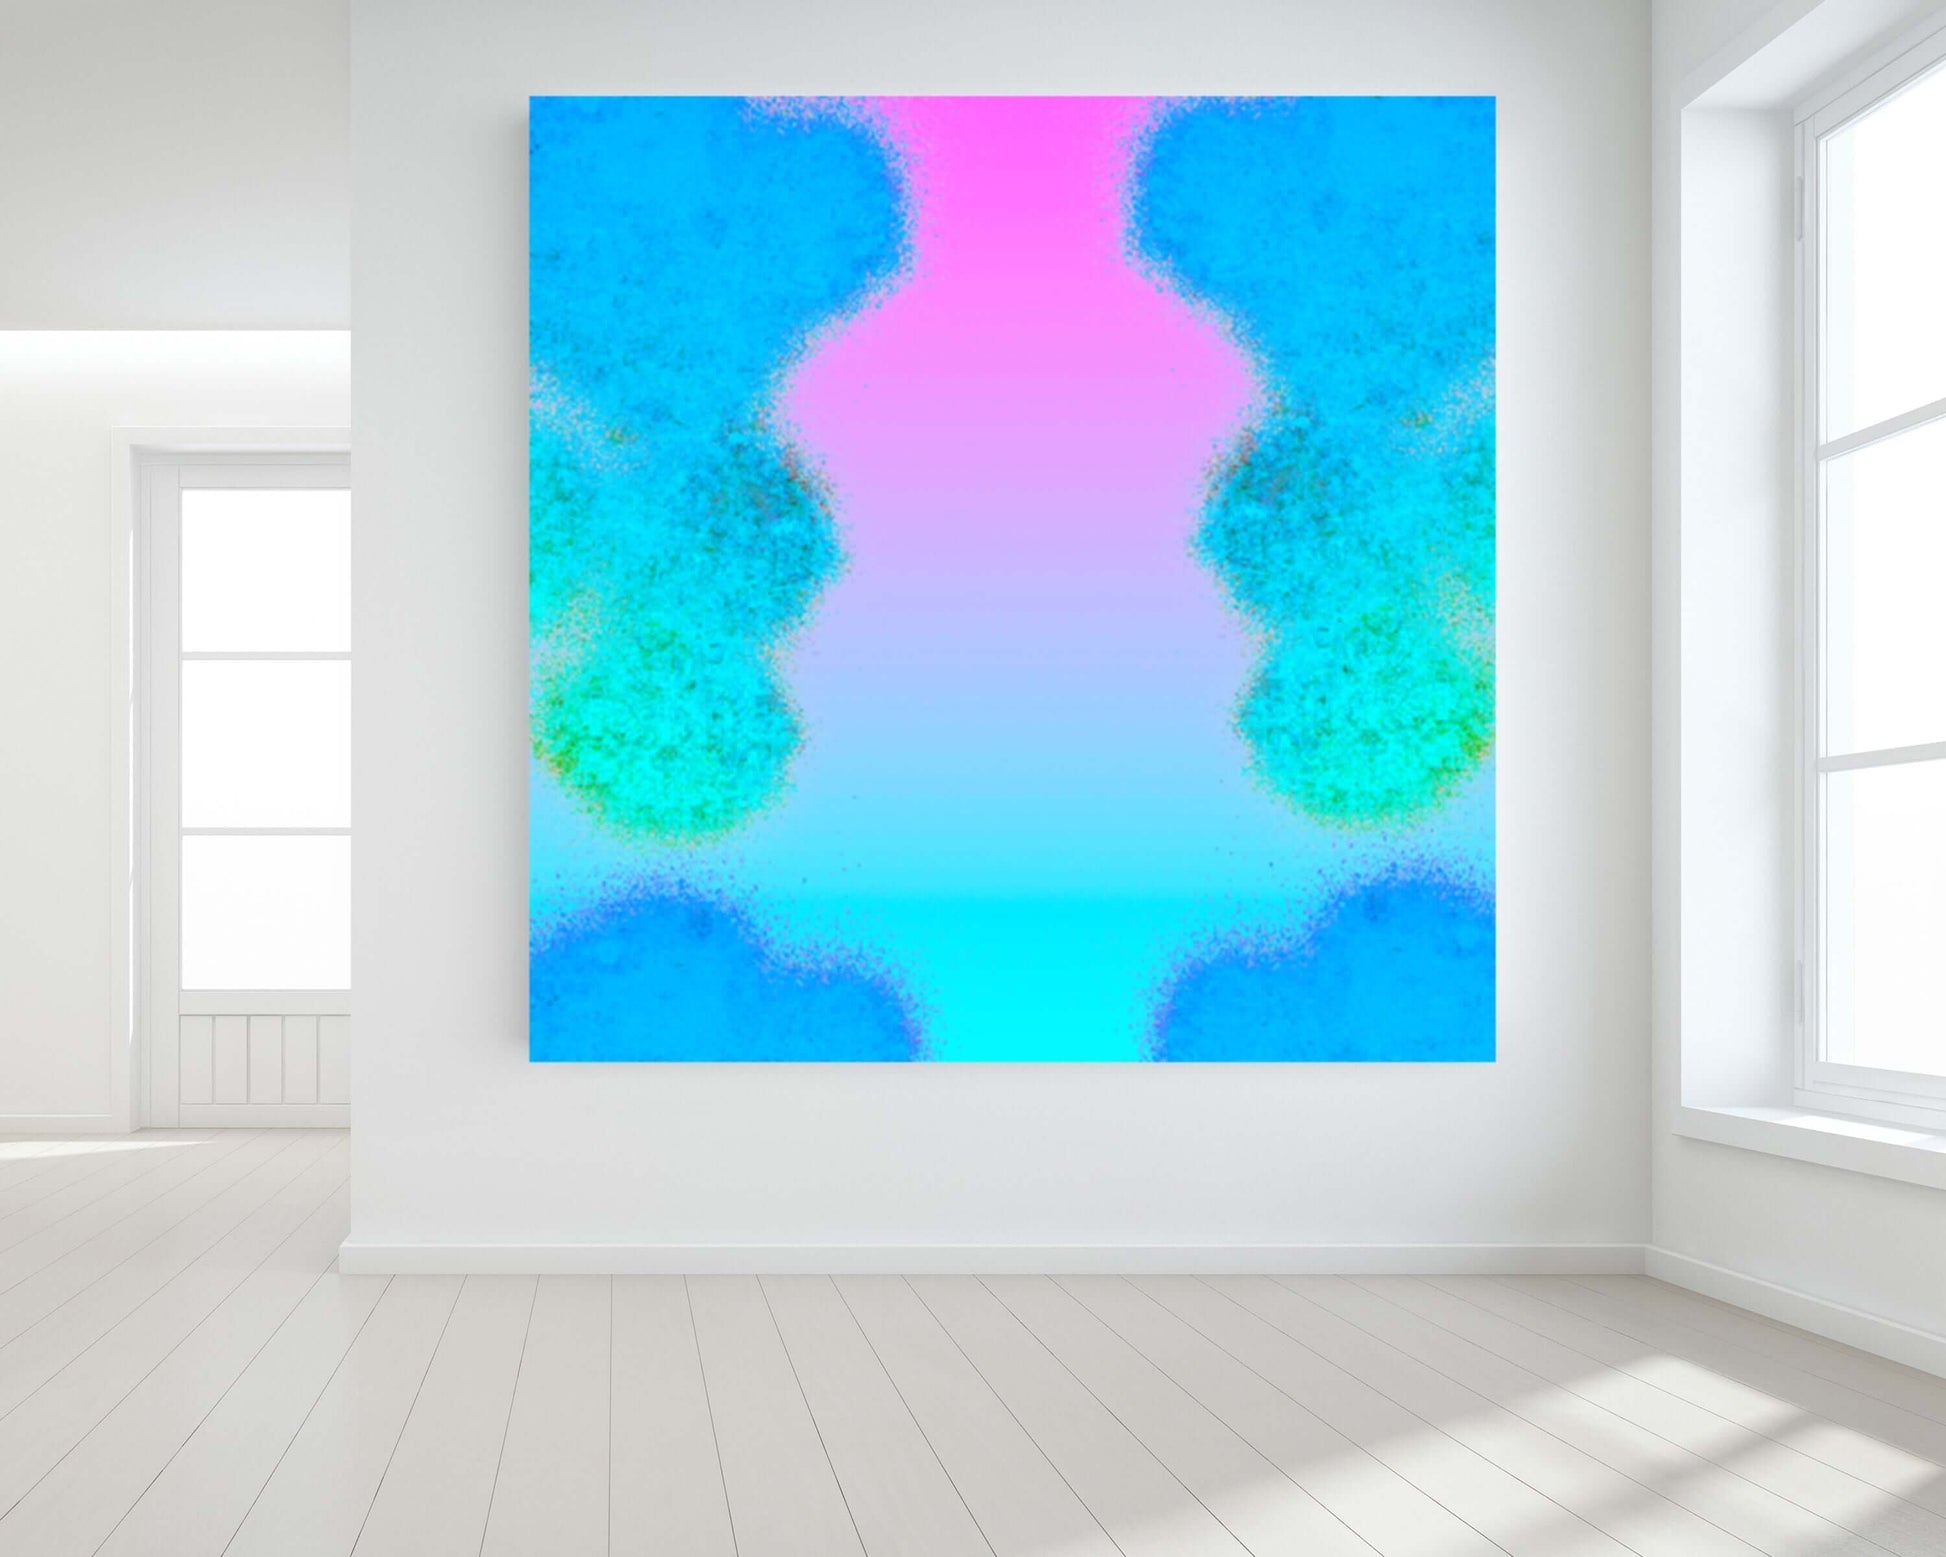 Pink and Blue Lava Lamp Shapes “Forever Now” Abstract Art Canvas Print Wall Art large Canvas on Wall